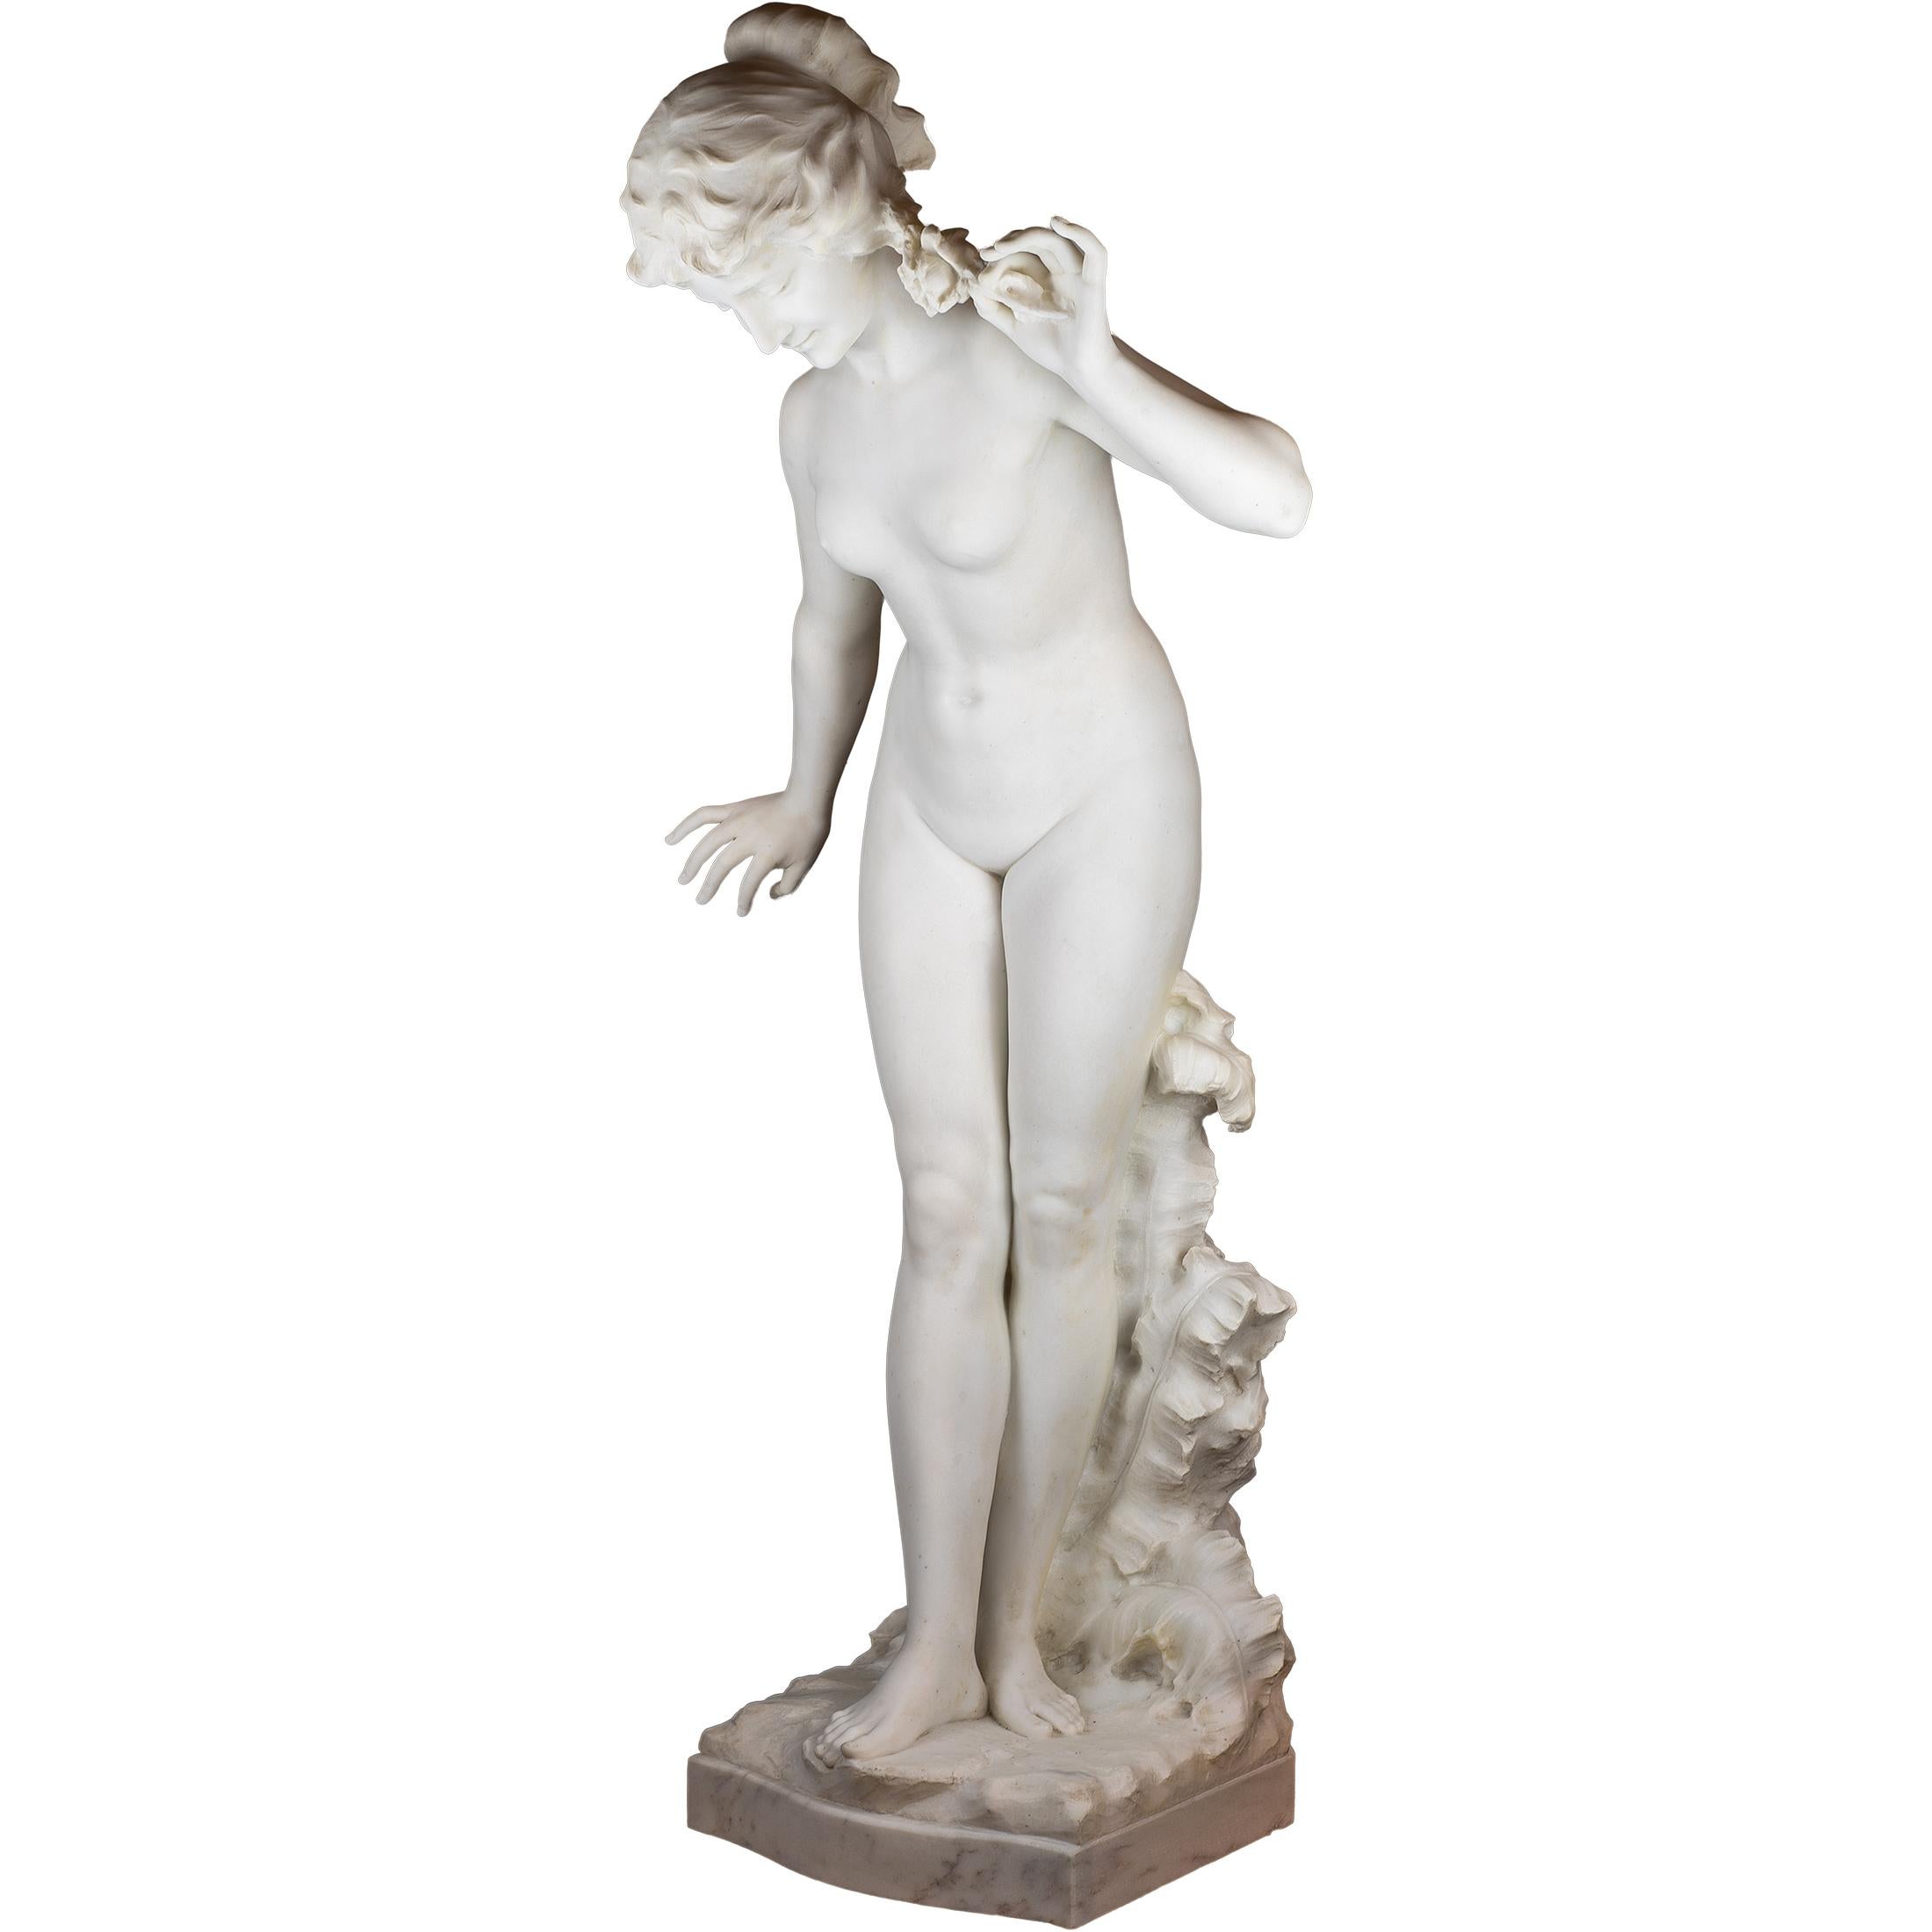 ARISTIDE PETRILLI 
Italian, (1868-1930)

Flora (Allegory of Spring)
Signed Prof Pedrilli; Galleria Bazzanti Firenze
49 inches high (Statue); 32 3/4 x 19 1/4 inches (Pedestal)


Notes: Finely carved Italian carrara marble of a nude beauty signed Prof